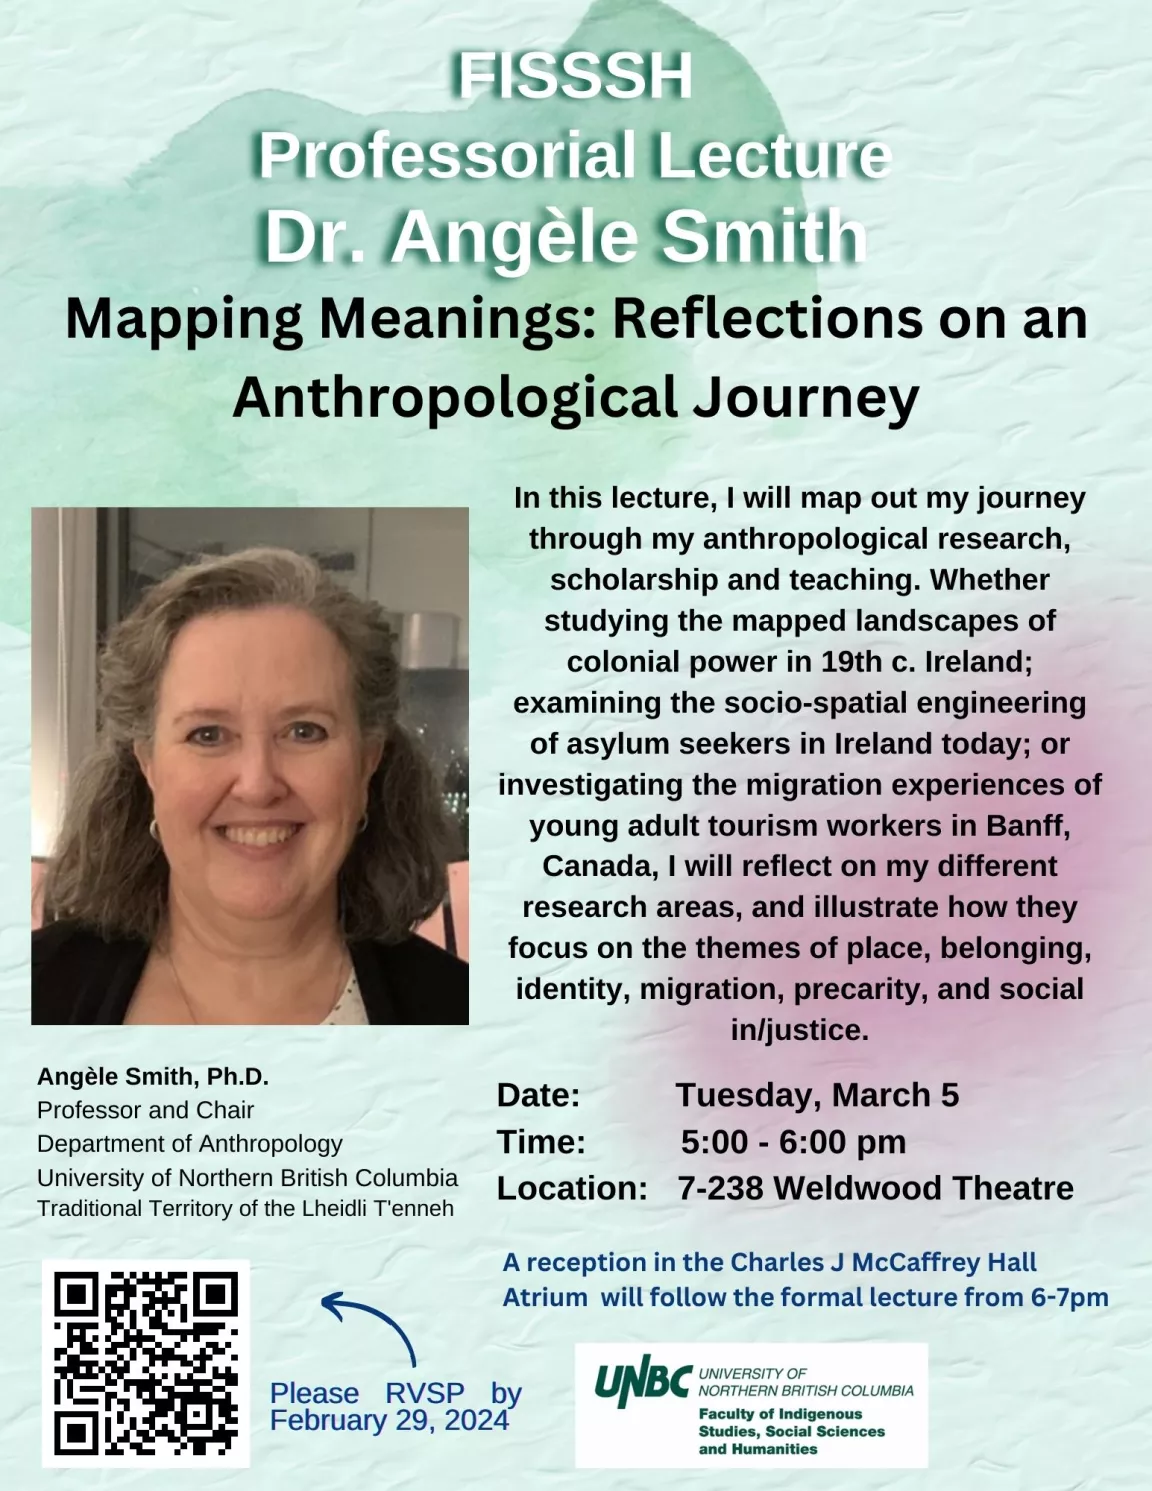 Event poster for Mapping Meanings: Reflections on an Anthropological Journey